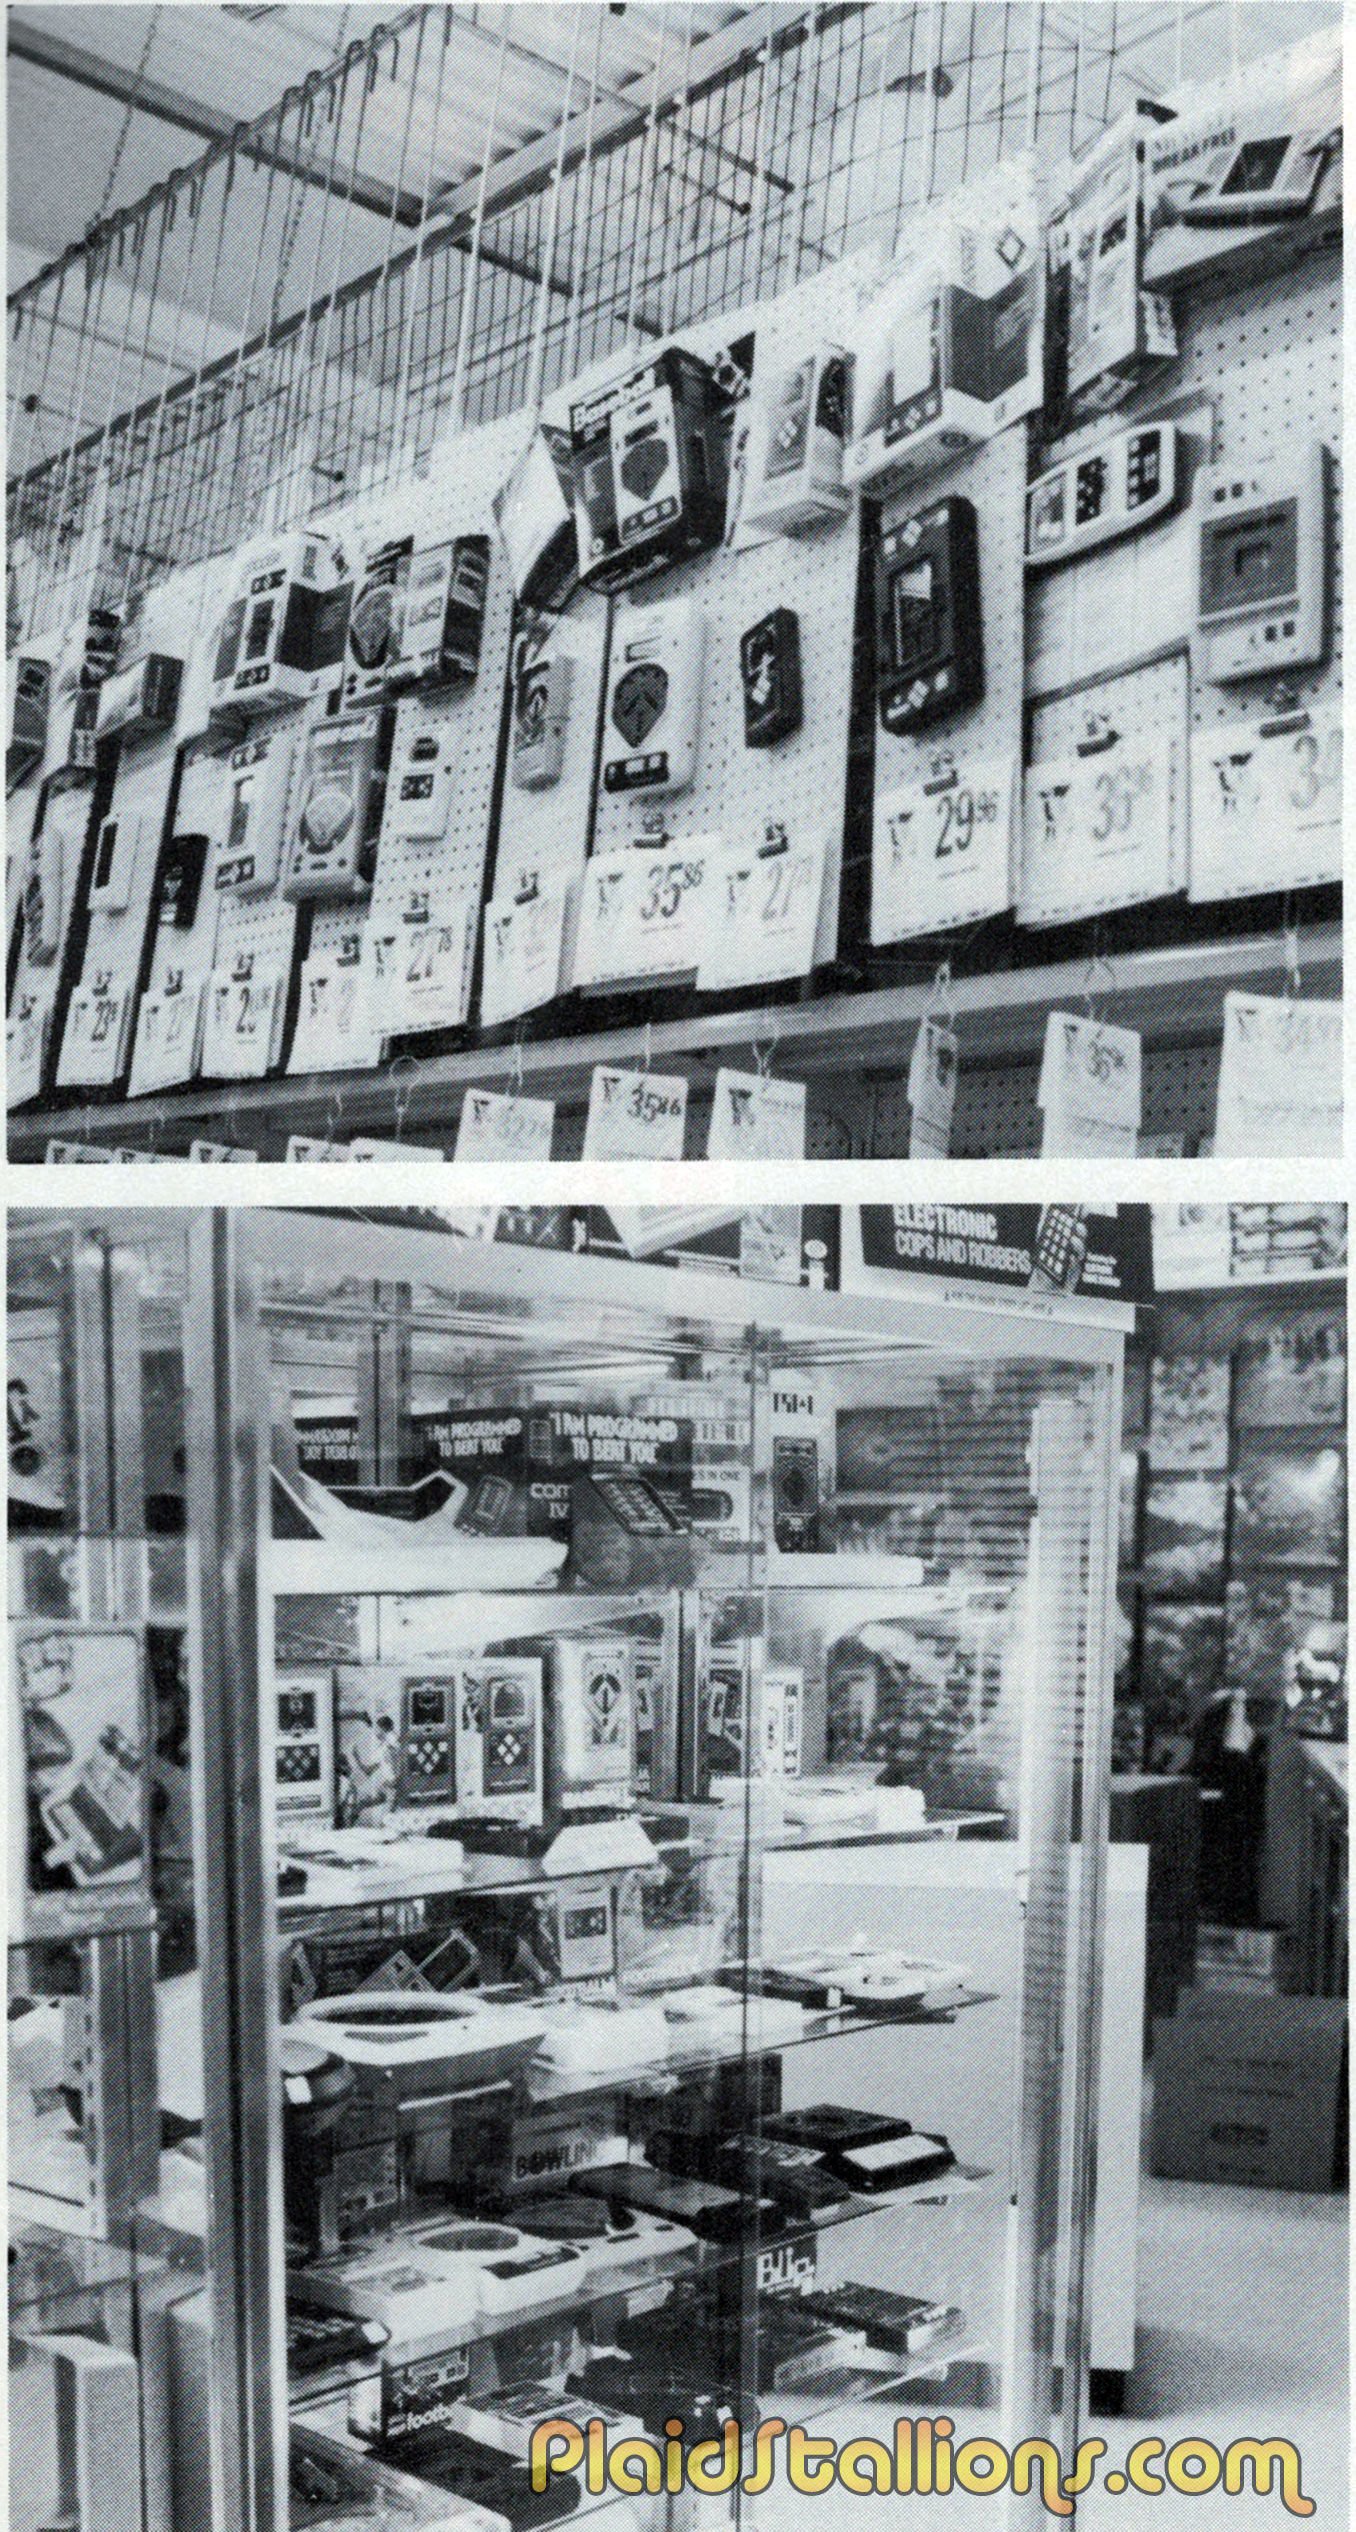 Electronic Games in a toystore circa 1980